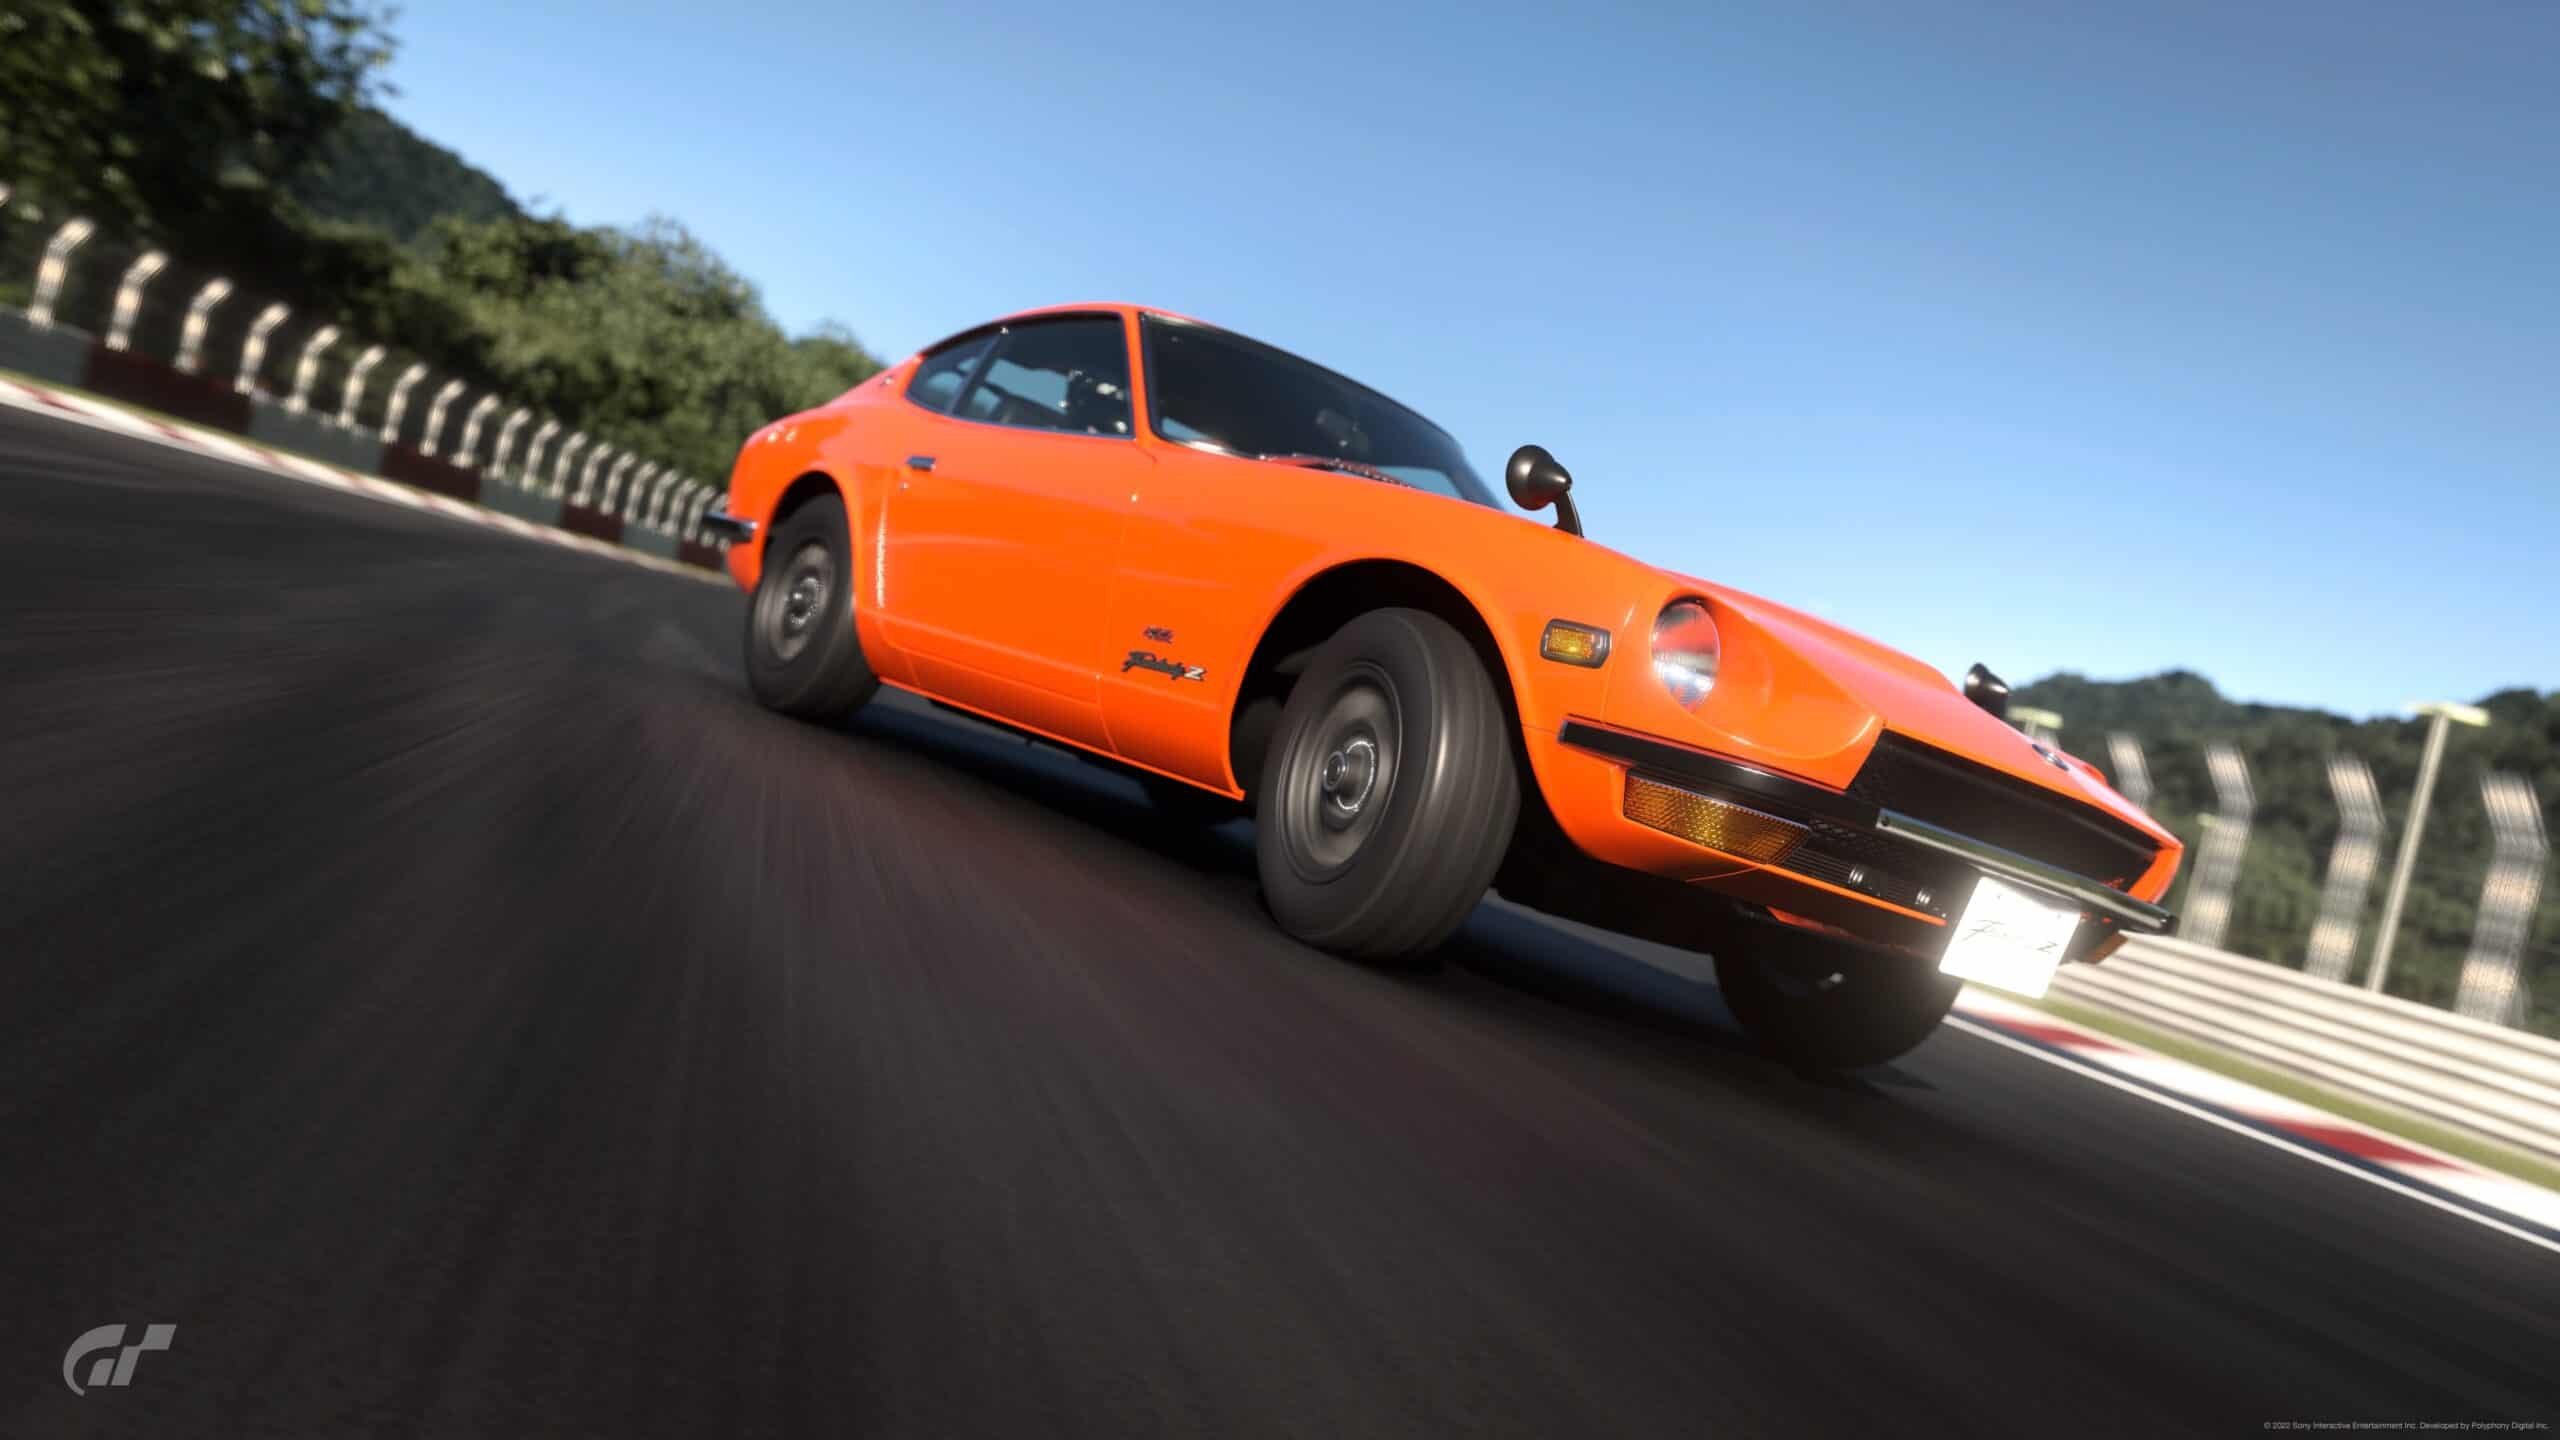 Gran Turismo 7's next update will arrive 26th May